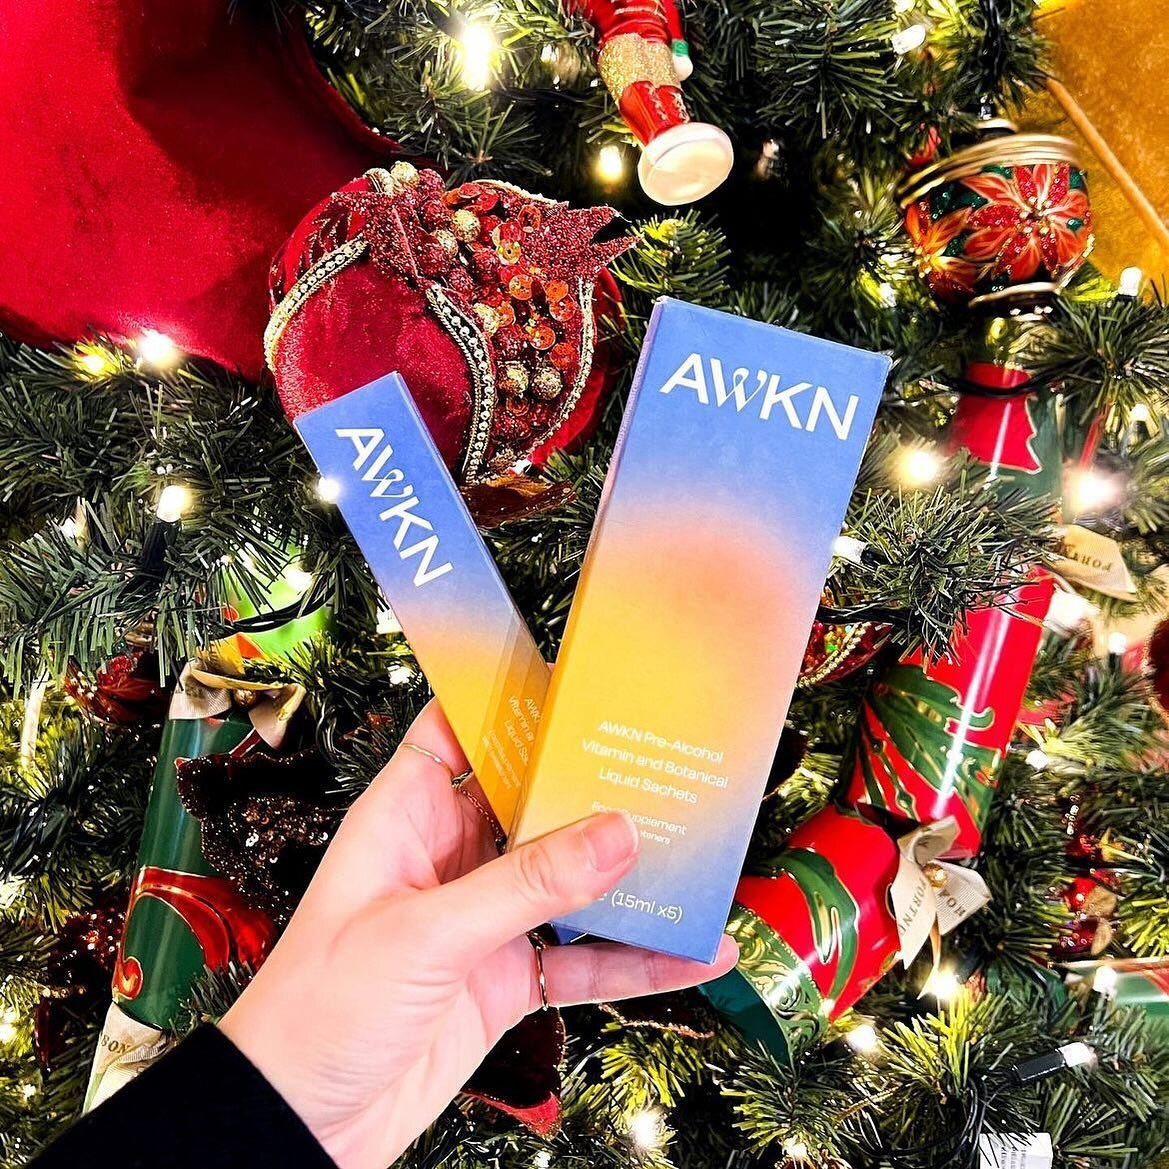 &lsquo;Tis the season!! 🎄 

The festive cheer will be flowing&hellip;don&rsquo;t let it get to your head 🥴 

Make sure you have some AWKN always handy and avoid the heavy!

Shop now. Link in bio